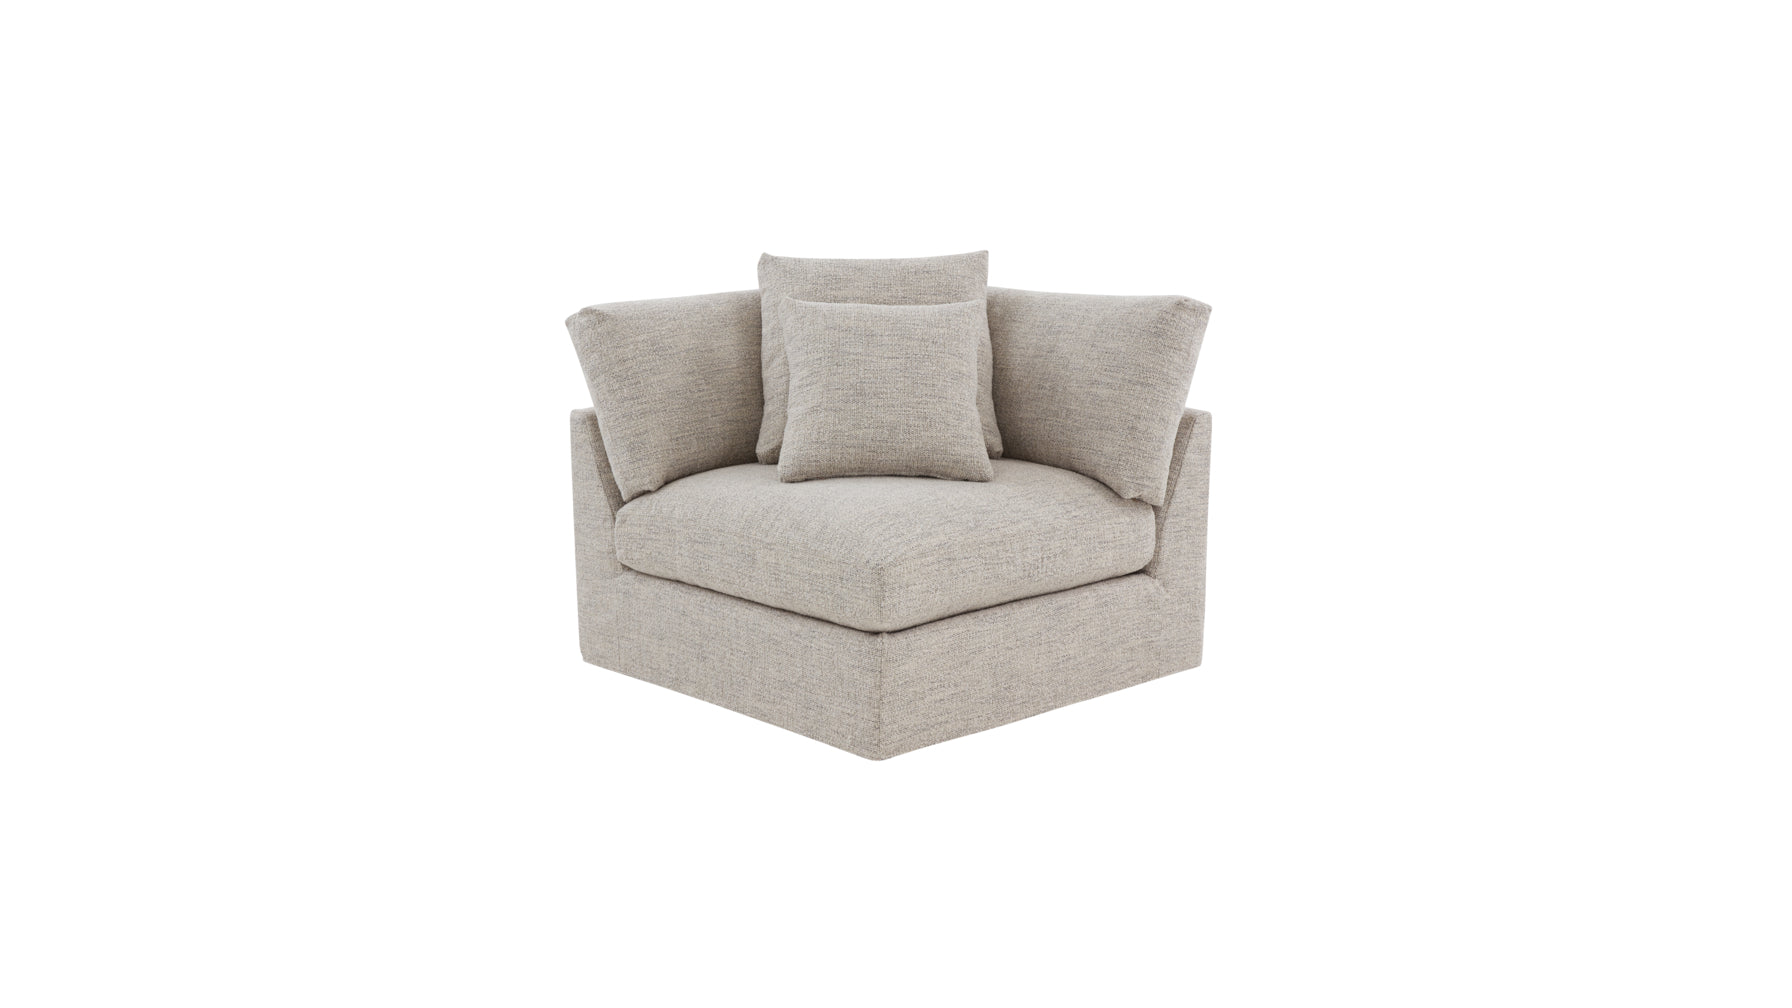 Get Together™ Corner Chair, Large, Oatmeal - Image 3